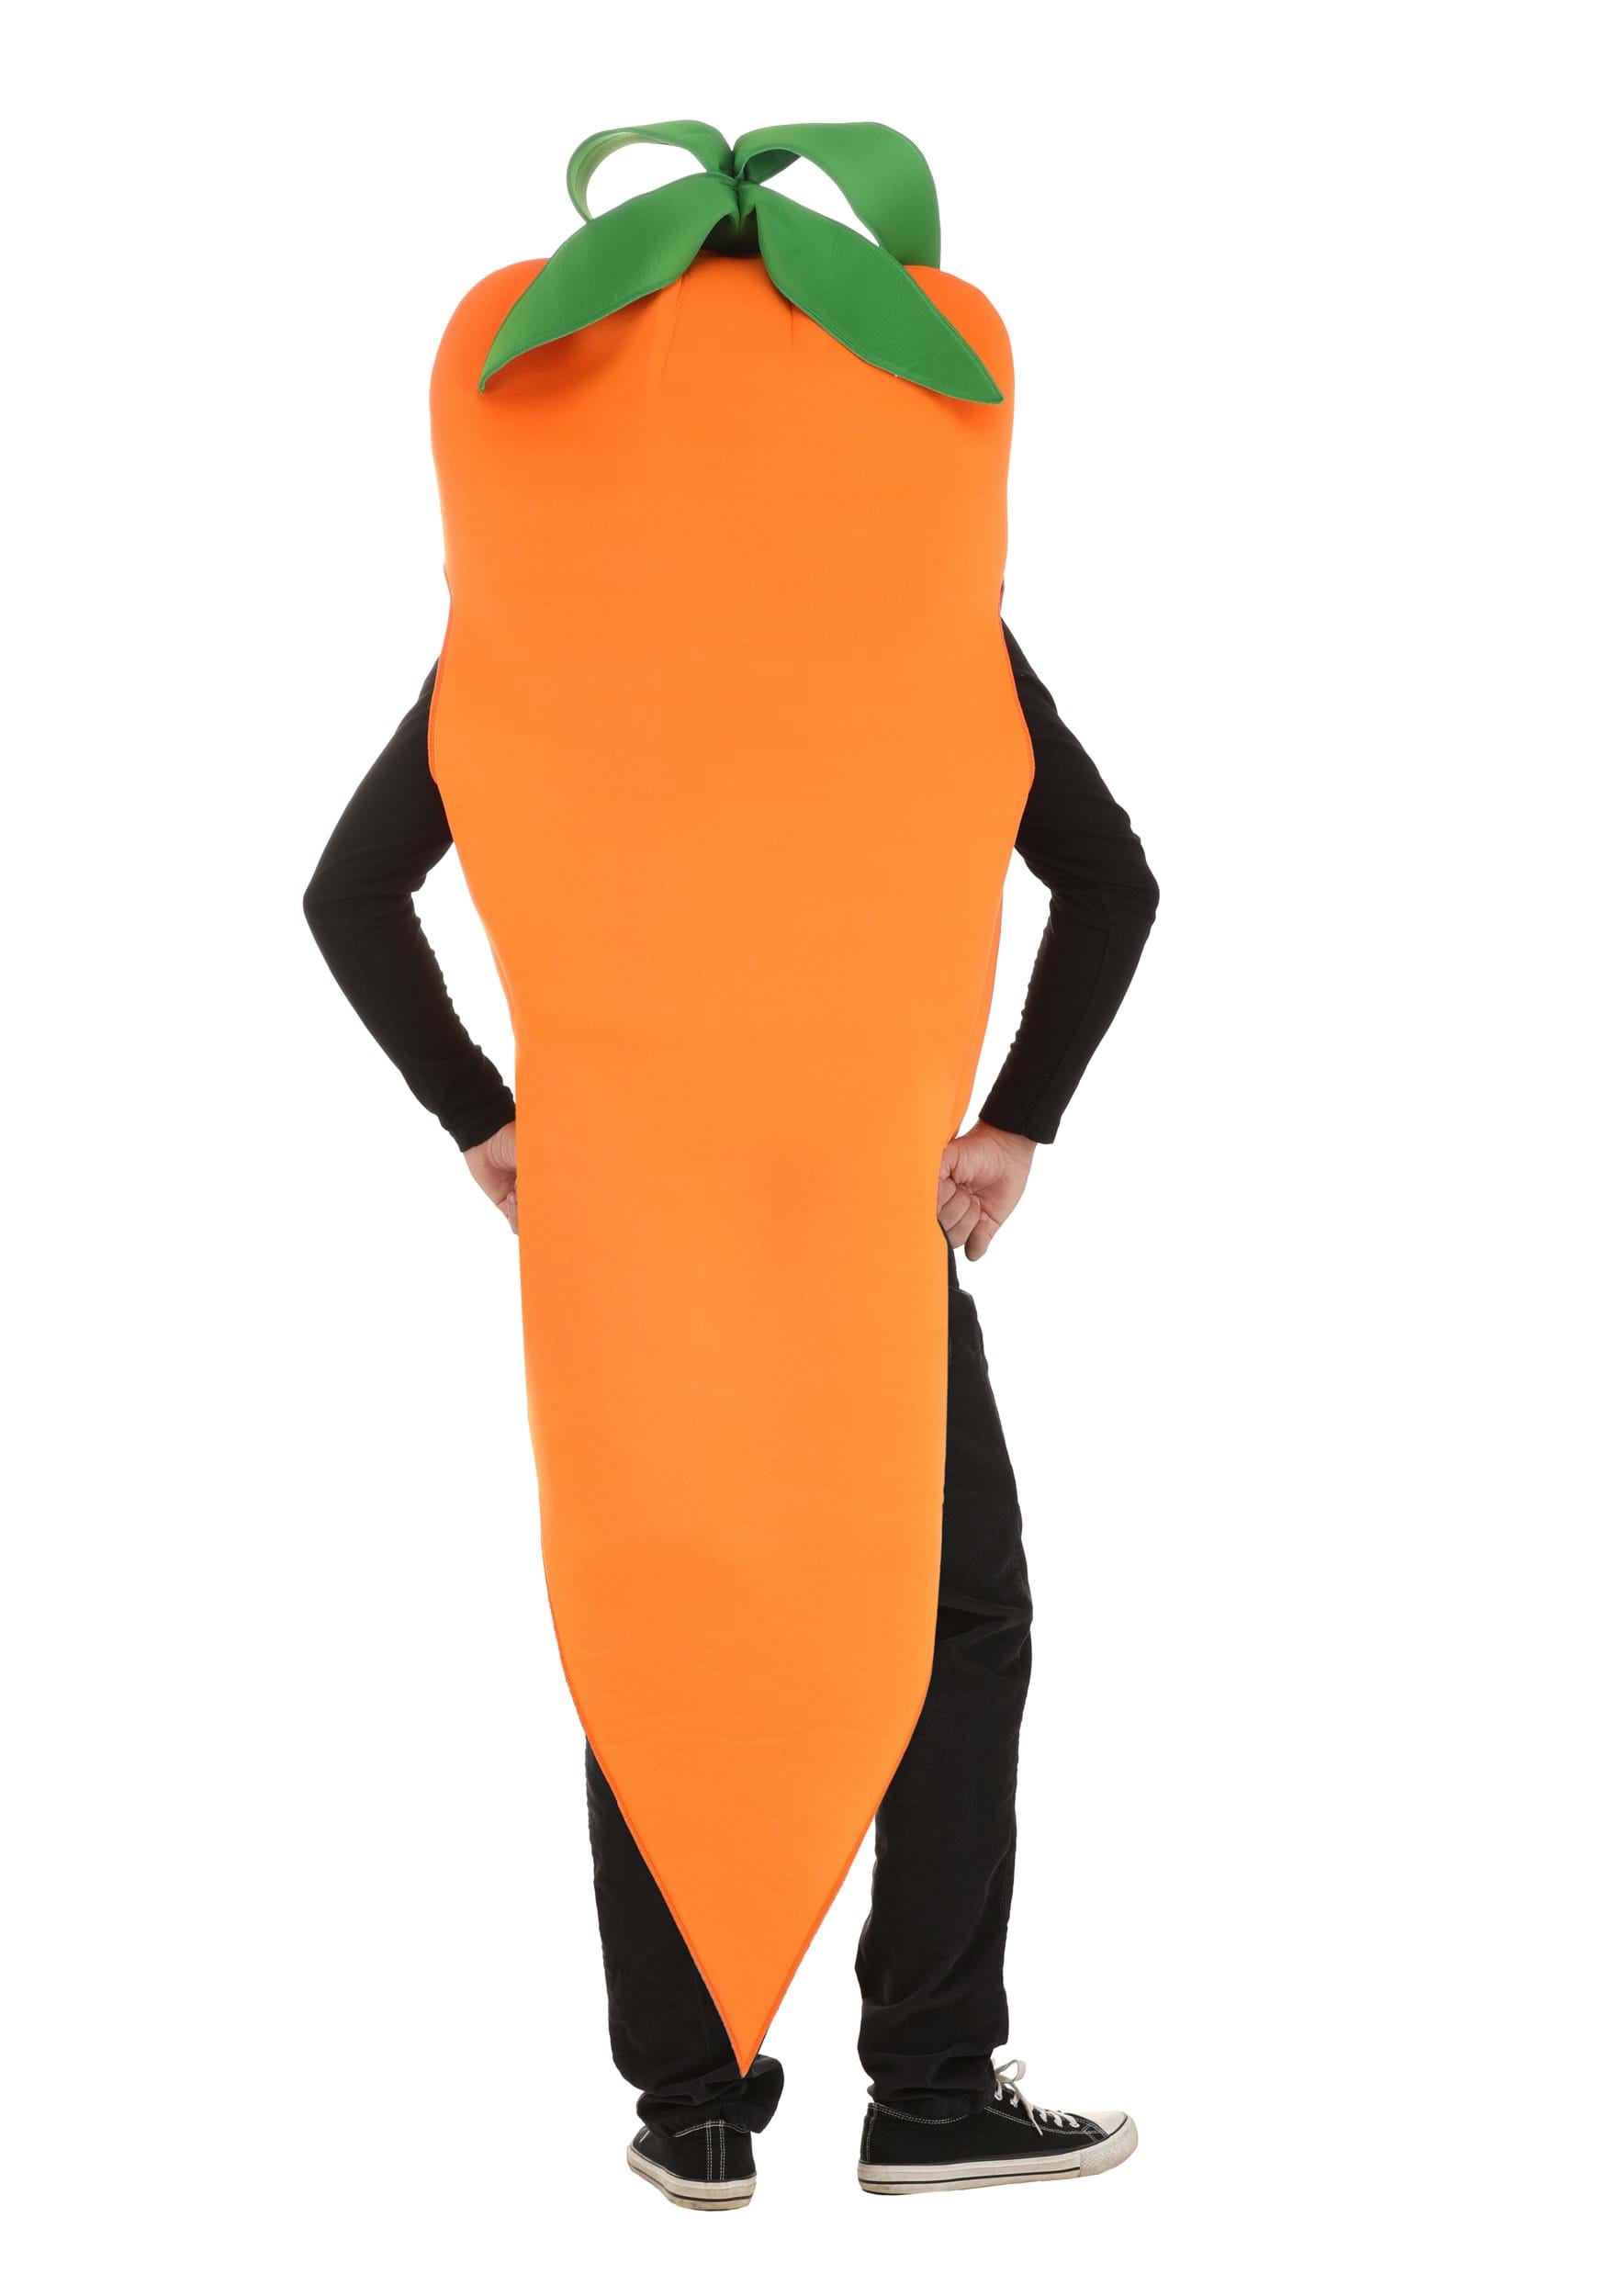 Carrot Costume For Adults